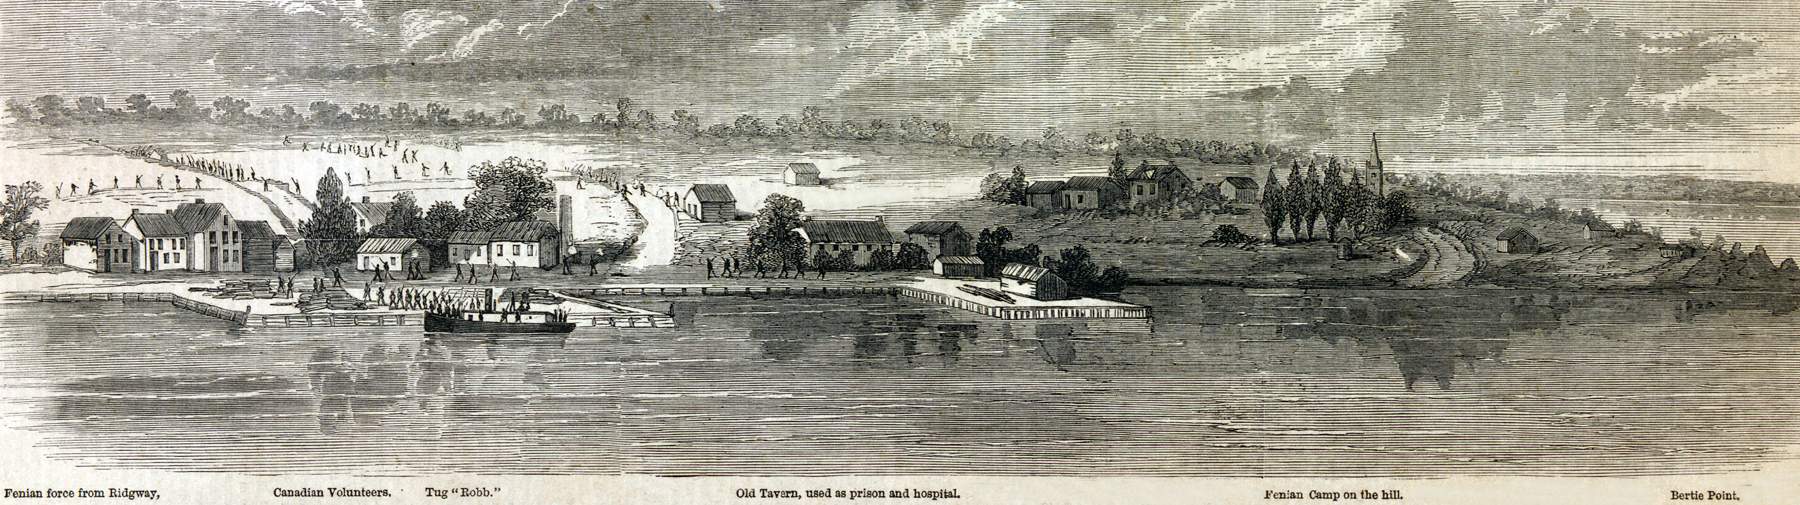 Battle of Waterloo Ferry, Fort Erie, Ontario, Canada, June 2, 1866, artist's impression